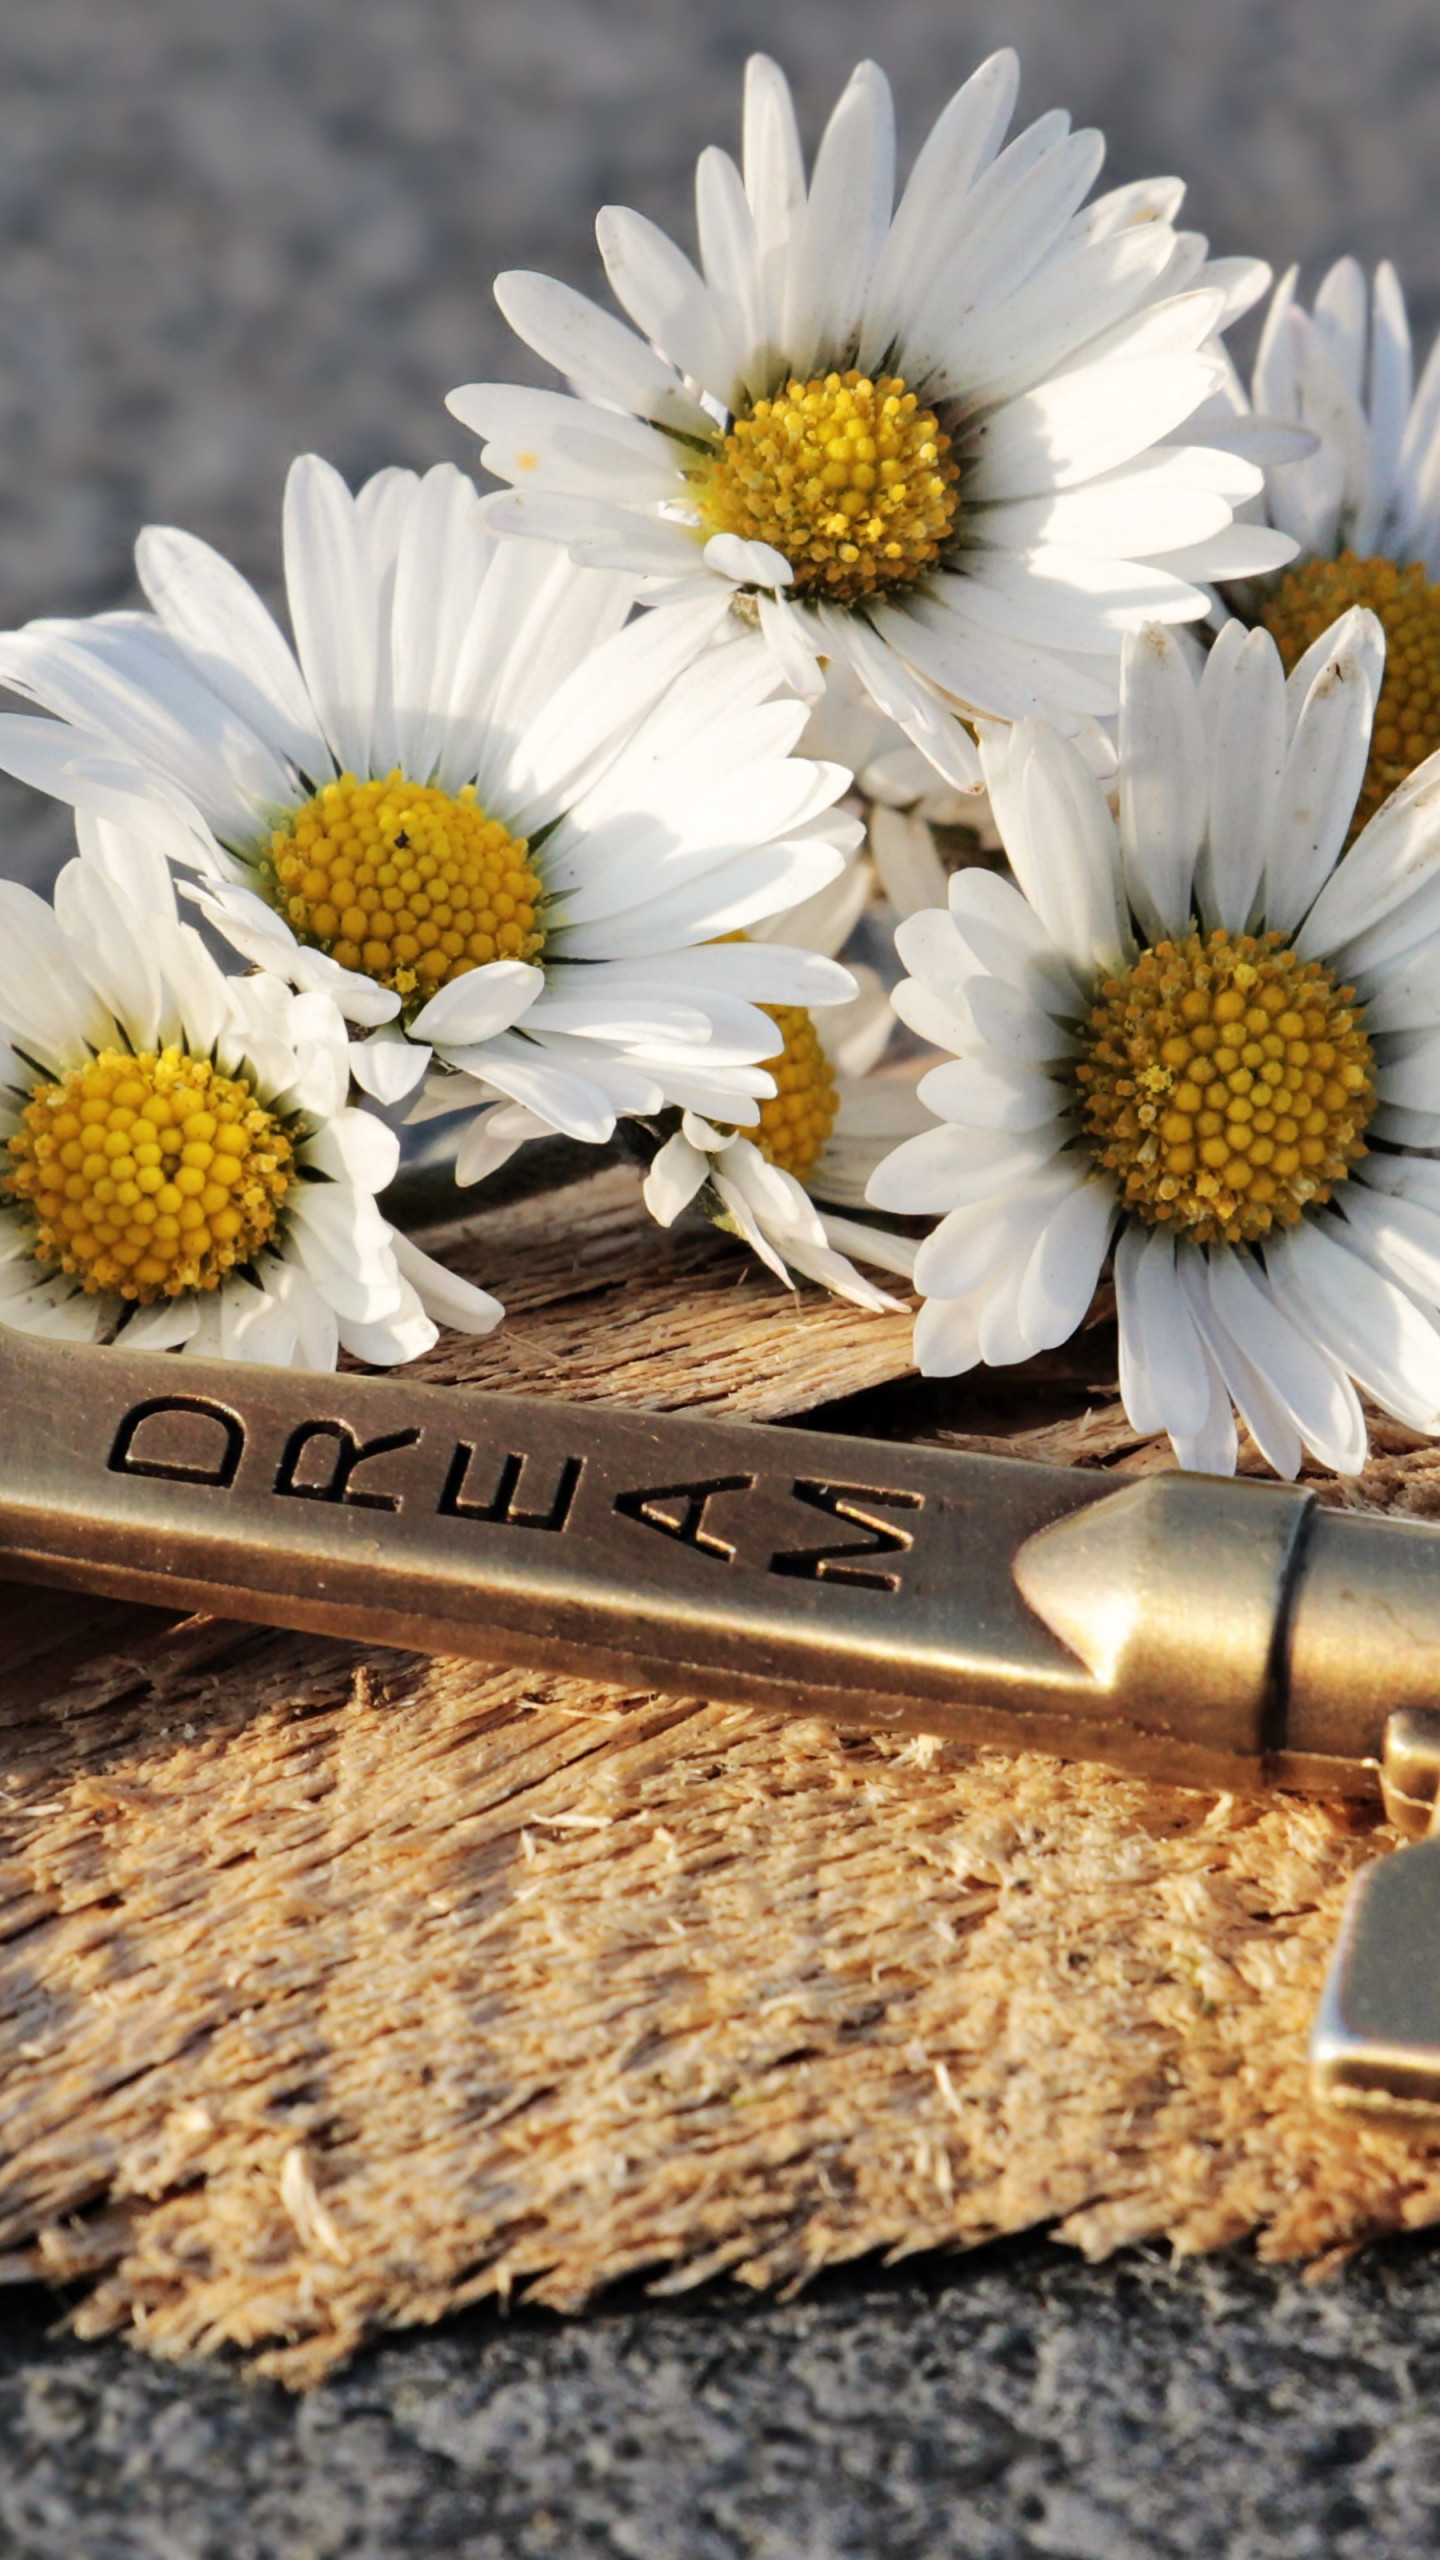 The dreams key and daisy flowers wallpaper 1440x2560